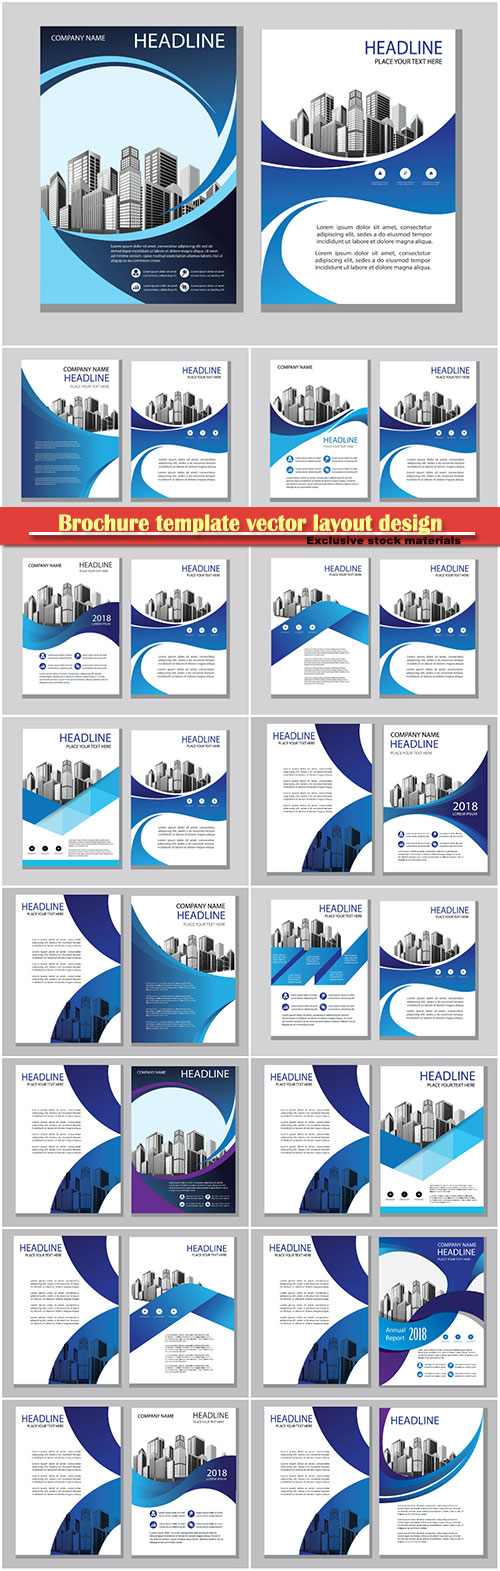 Brochure template vector layout design, corporate business annual report, magazine, flyer mockup # 141